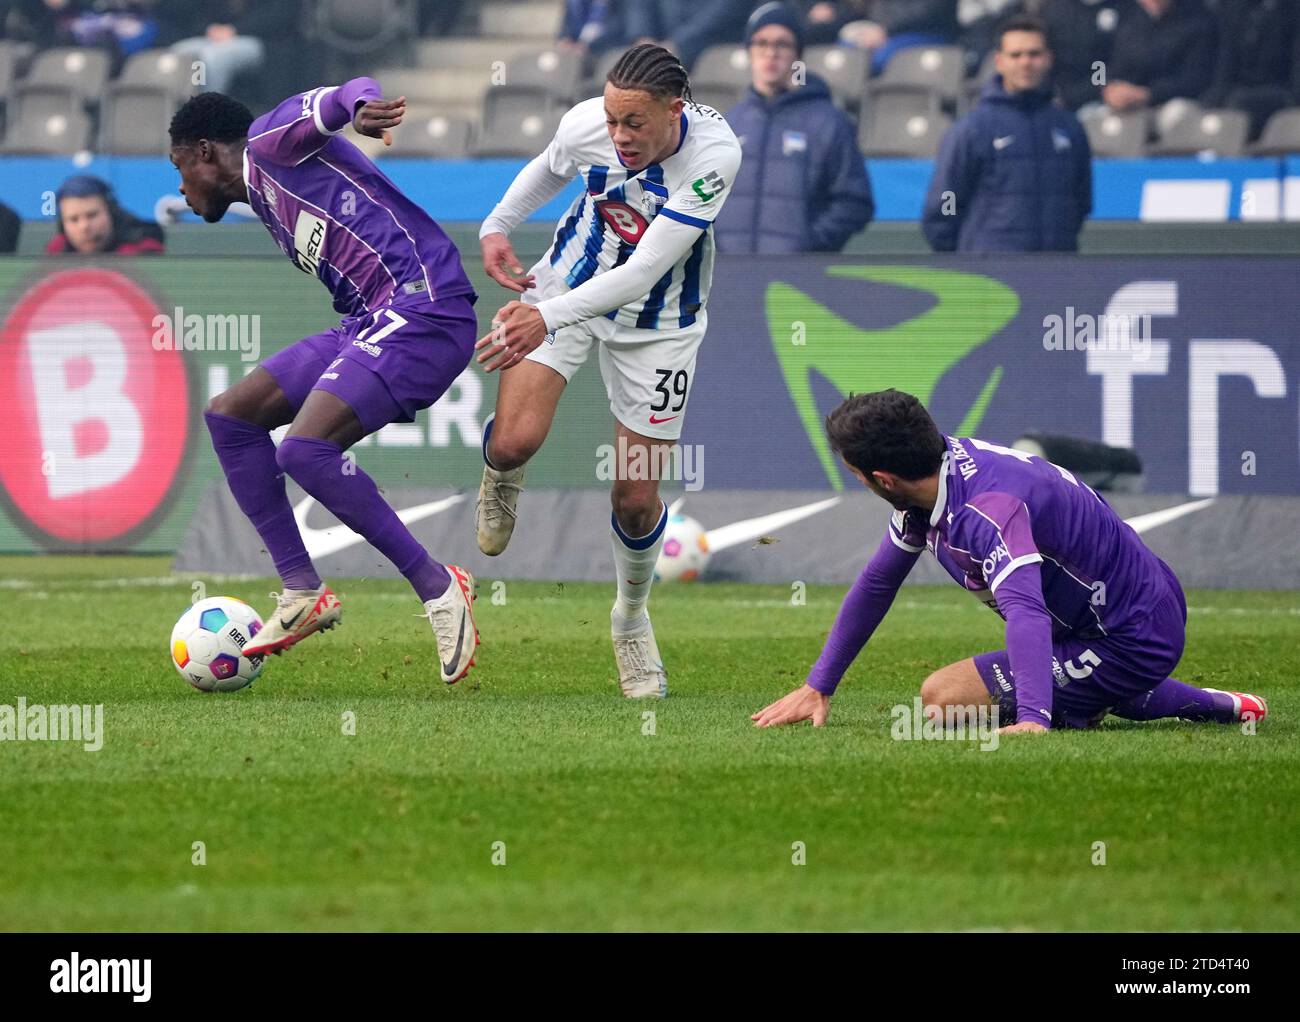 16 December 2023, Berlin: Soccer: Bundesliga 2, Hertha BSC - VfL Osnabrück, Matchday 17, Olympiastadion. Osnabrück's Christian Conteh (l) in action against Hertha's Derry Scherhant (M). Osnabrück's Bashkim Ajdini is on the right. Photo: Soeren Stache/dpa - IMPORTANT NOTE: In accordance with the regulations of the DFL German Football League and the DFB German Football Association, it is prohibited to utilize or have utilized photographs taken in the stadium and/or of the match in the form of sequential images and/or video-like photo series. Stock Photo